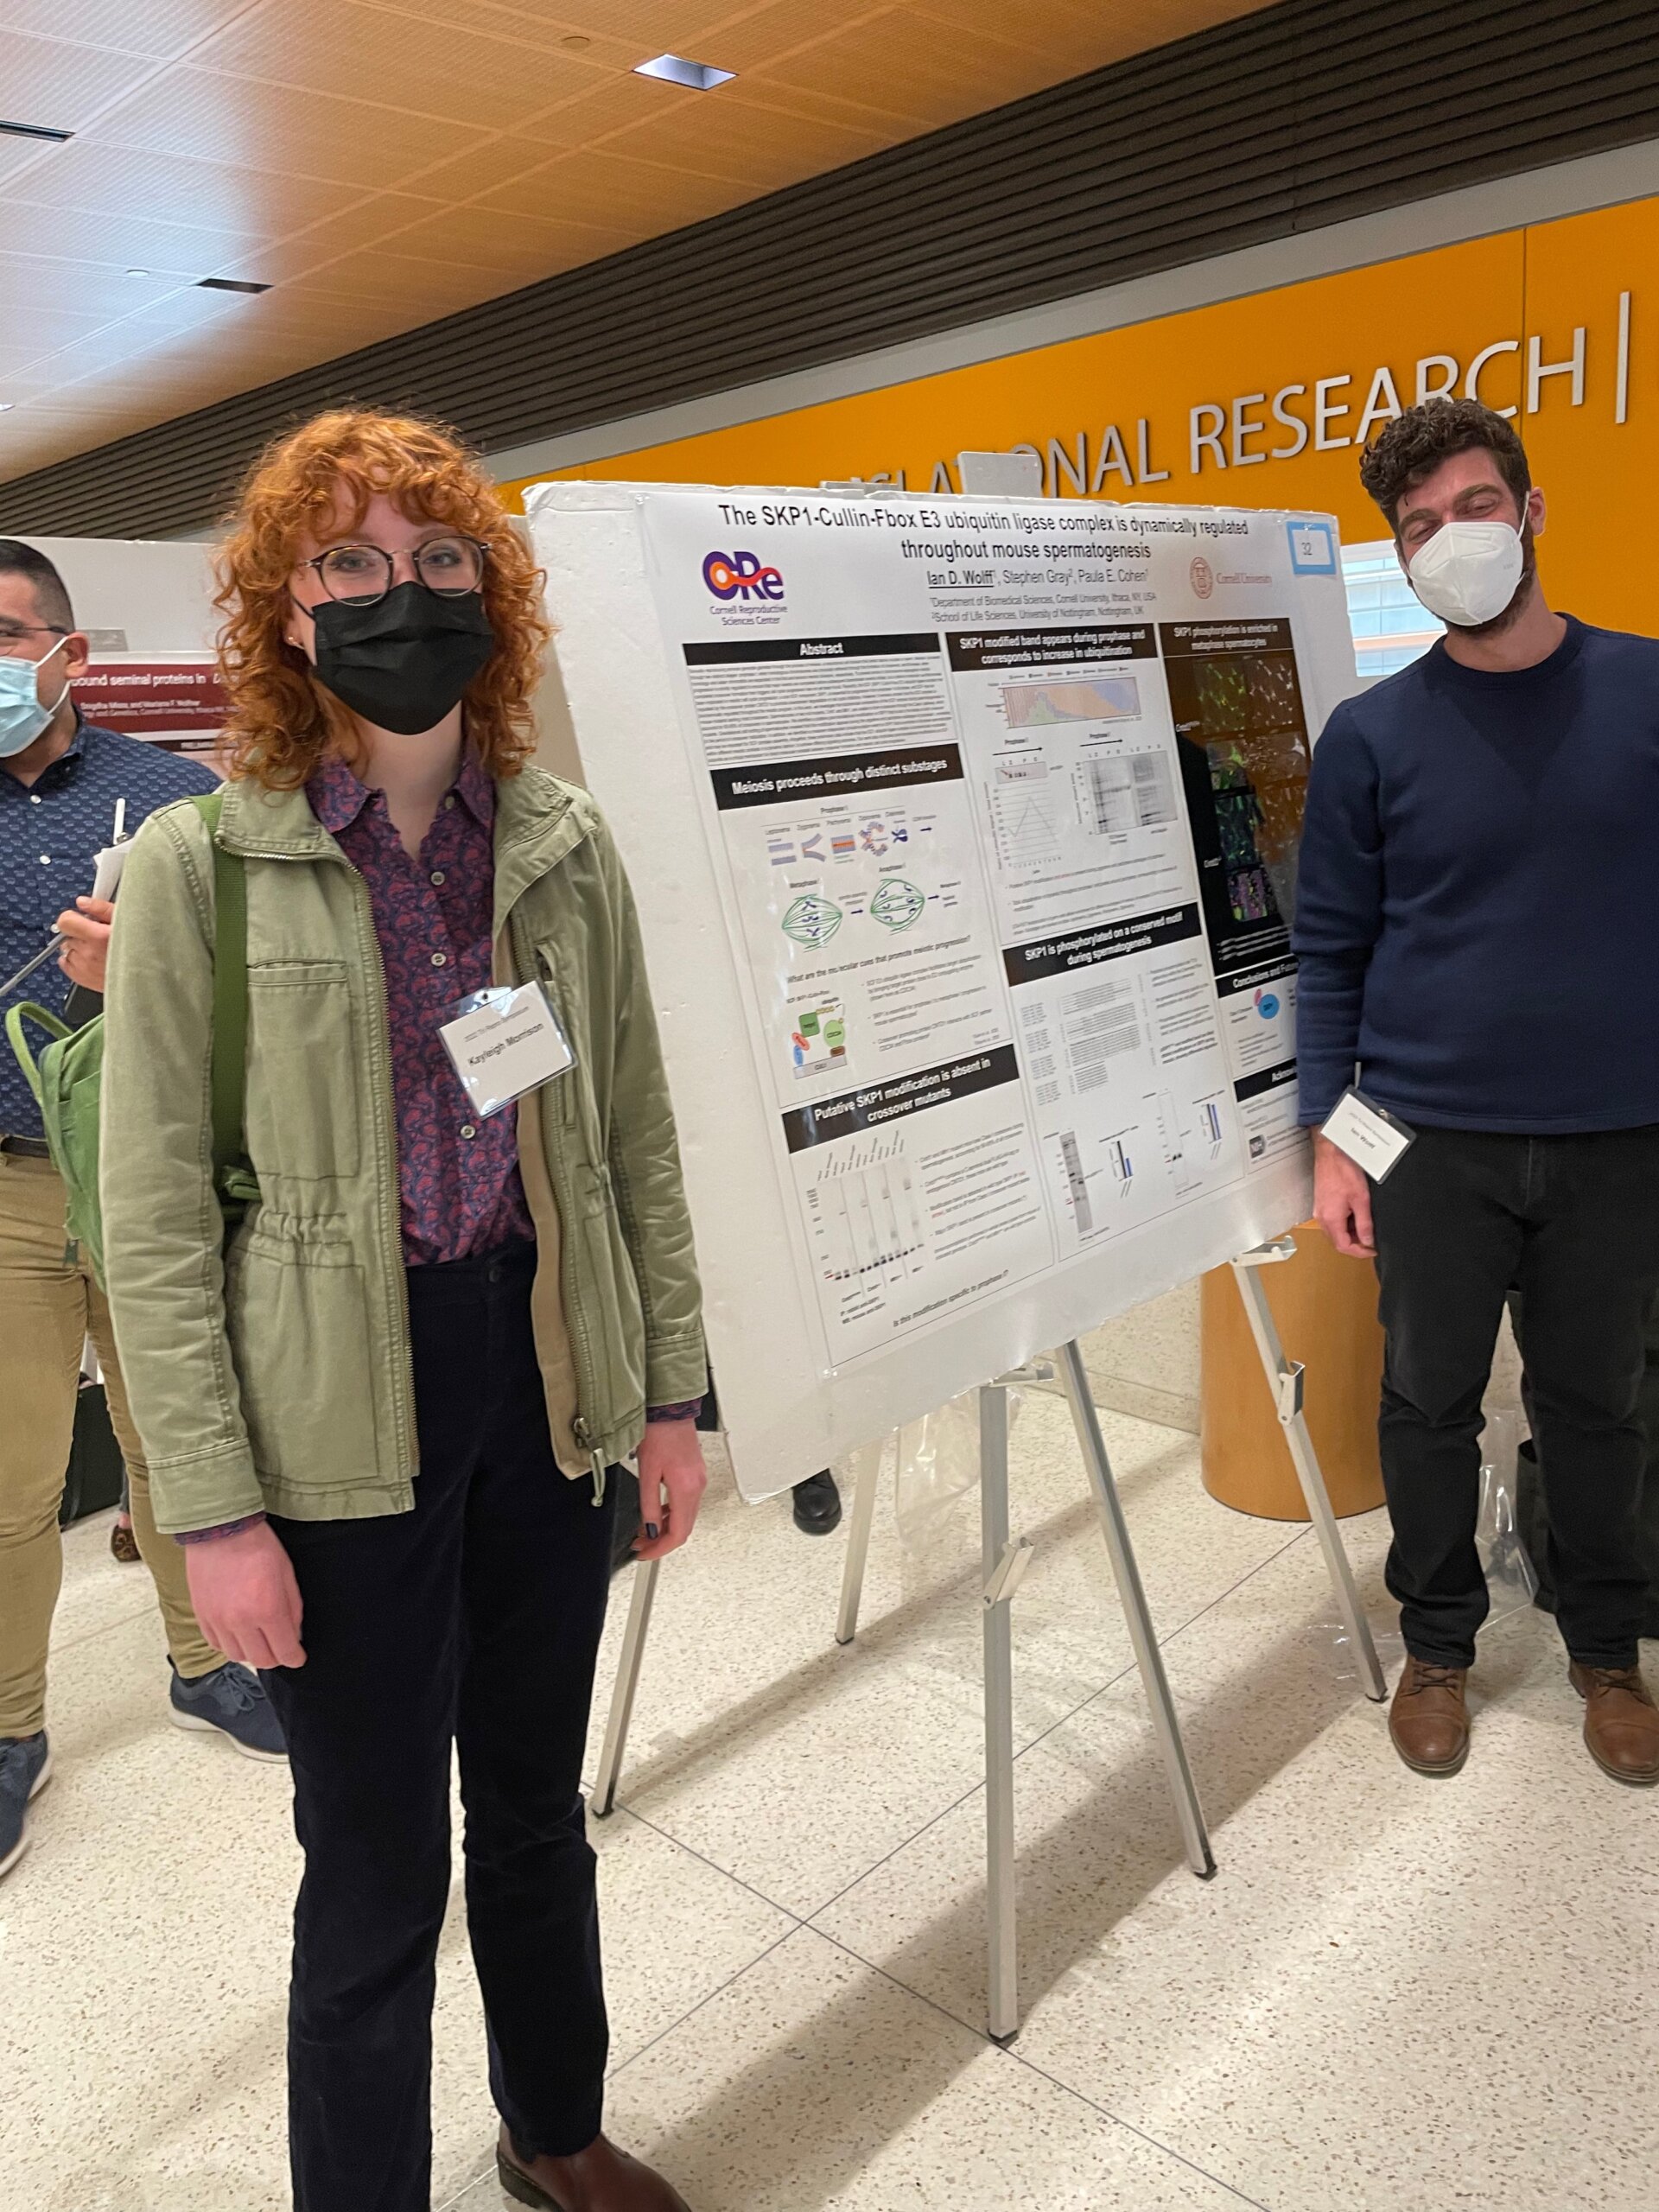 2 Cornell trainees in front of a “The SKP1-Cullin-Fbox E3 ubiquitin ligase complex is dynamically regulated throughout mouse spermatogenesis” poster